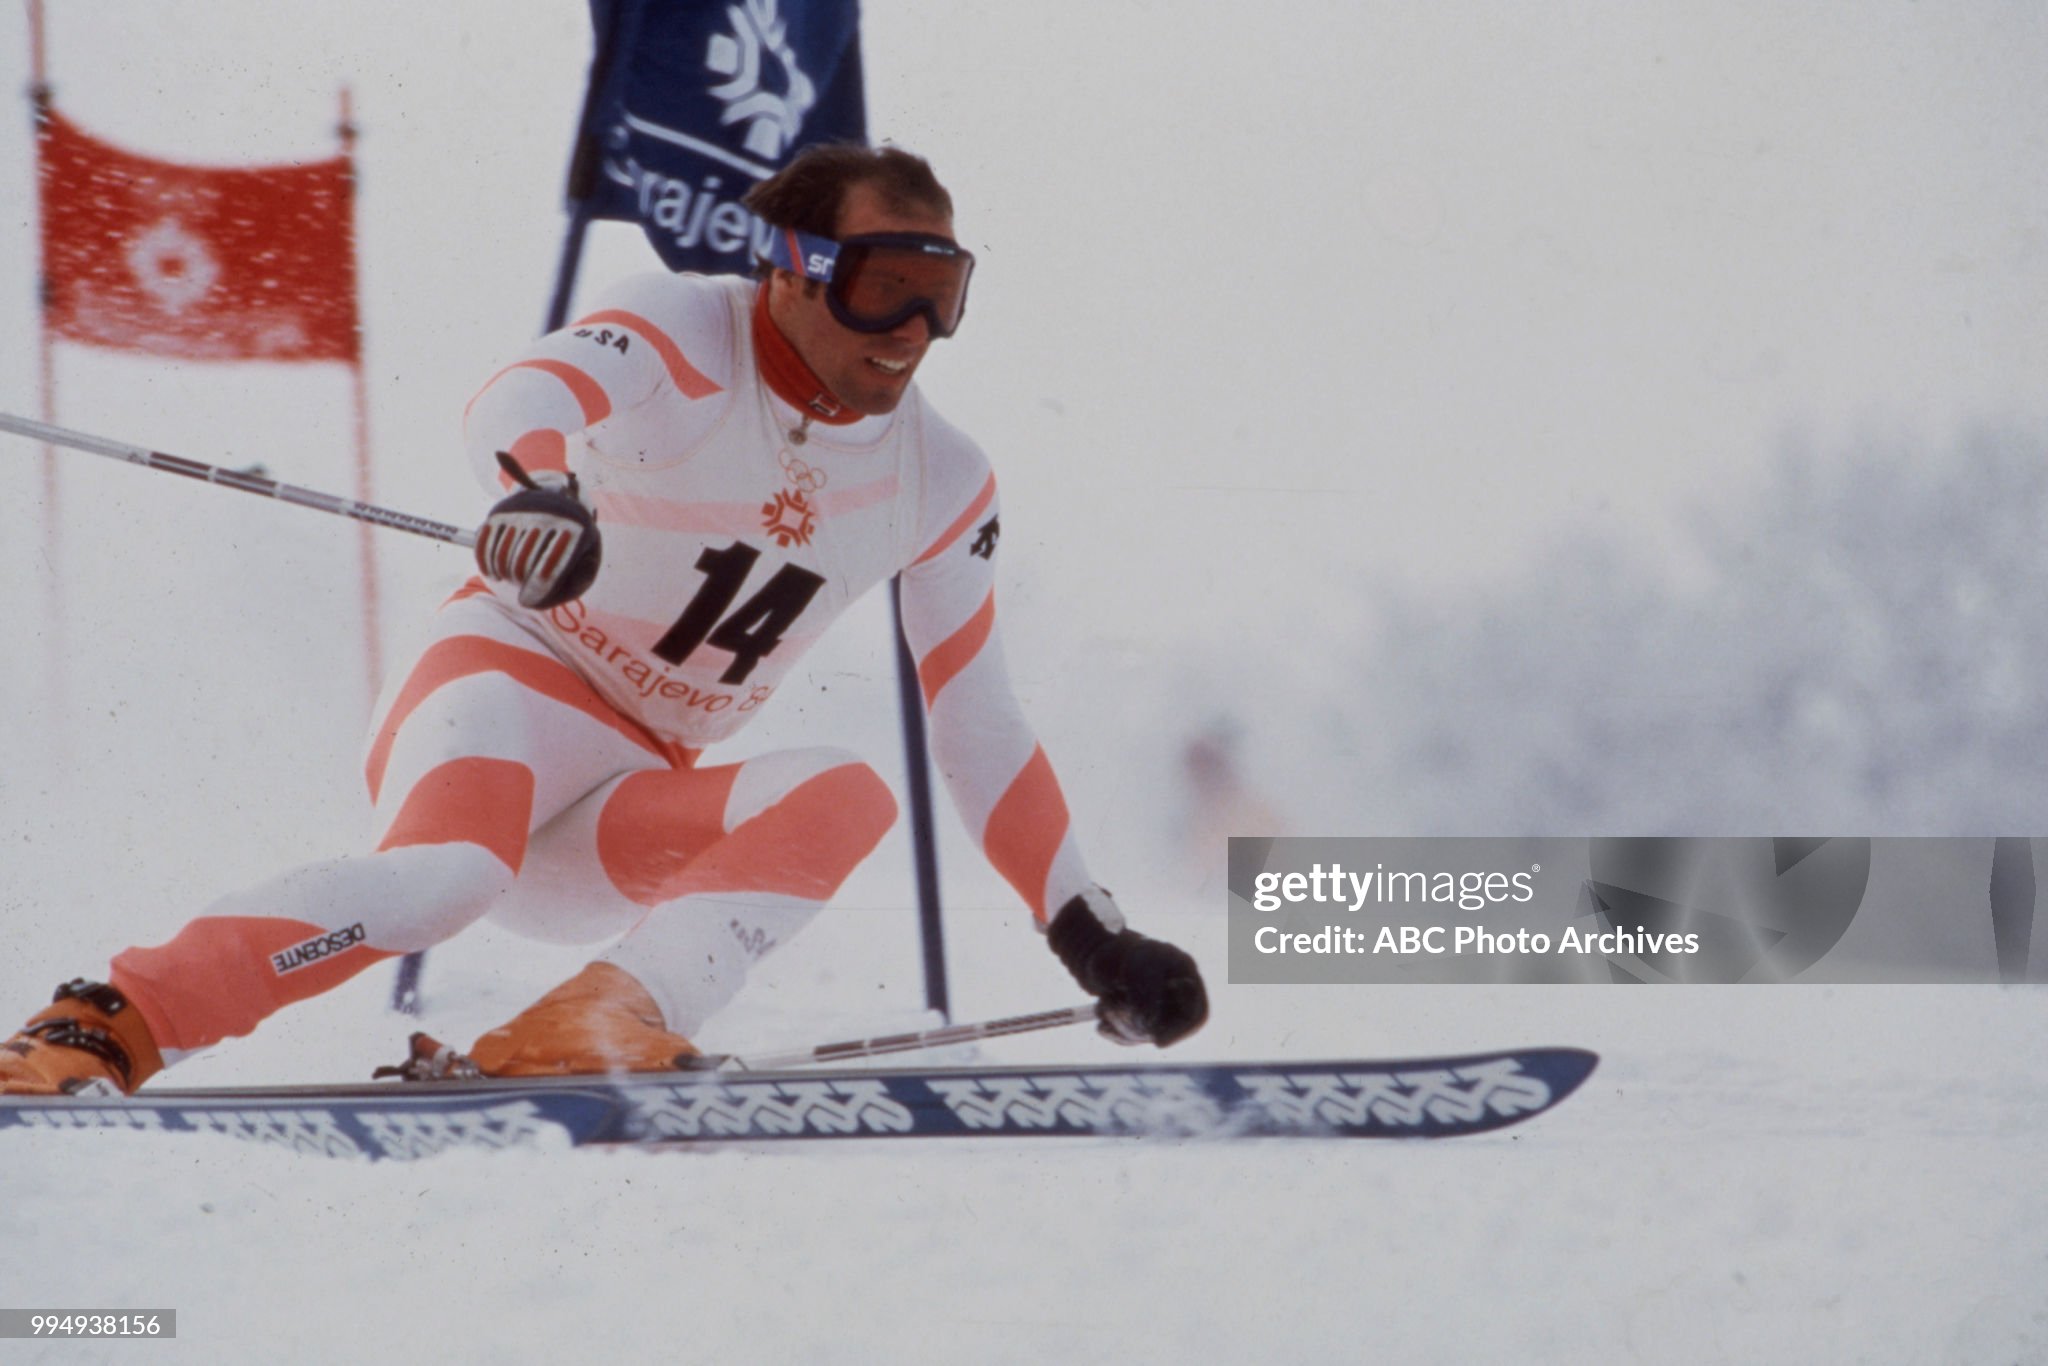 phil-mahre-competing-in-the-1984-winter-olympics.jpg